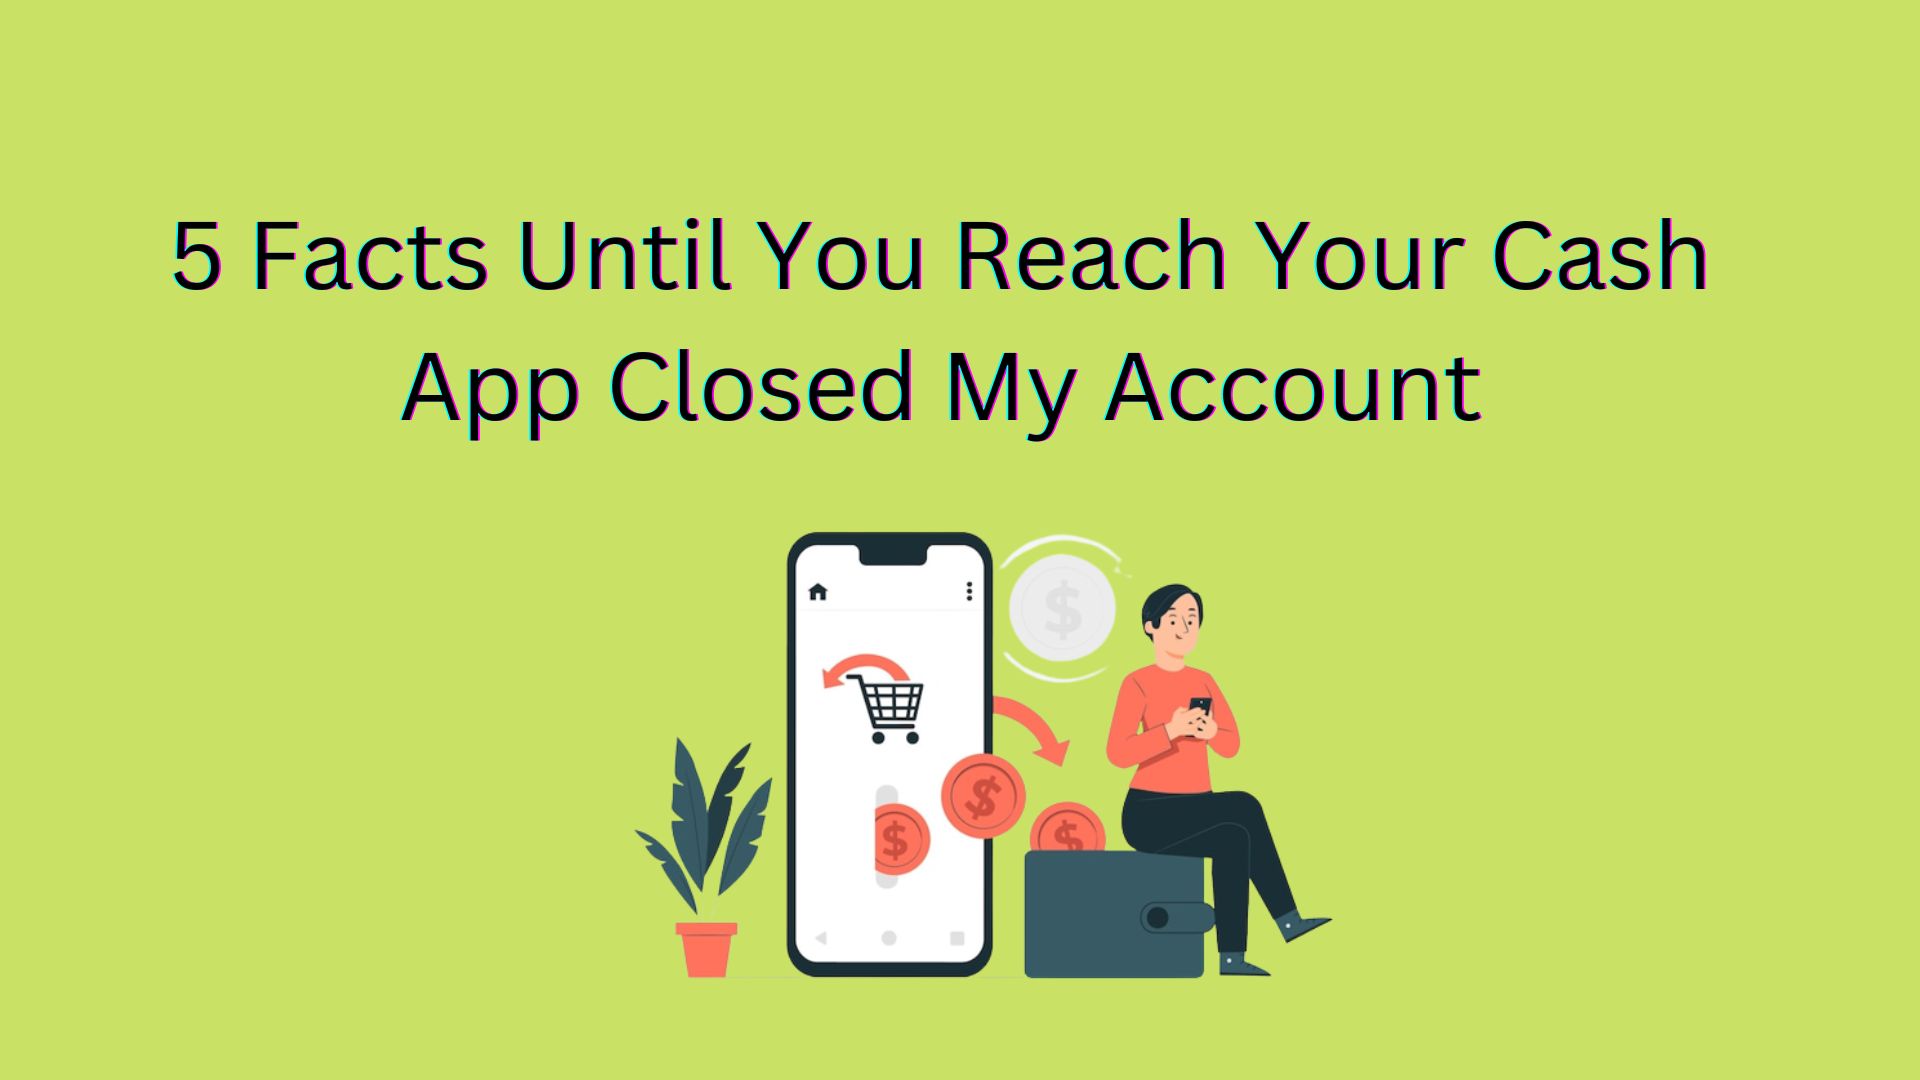 5 Things Will Change The Way You Approach Cash App Closed My Account